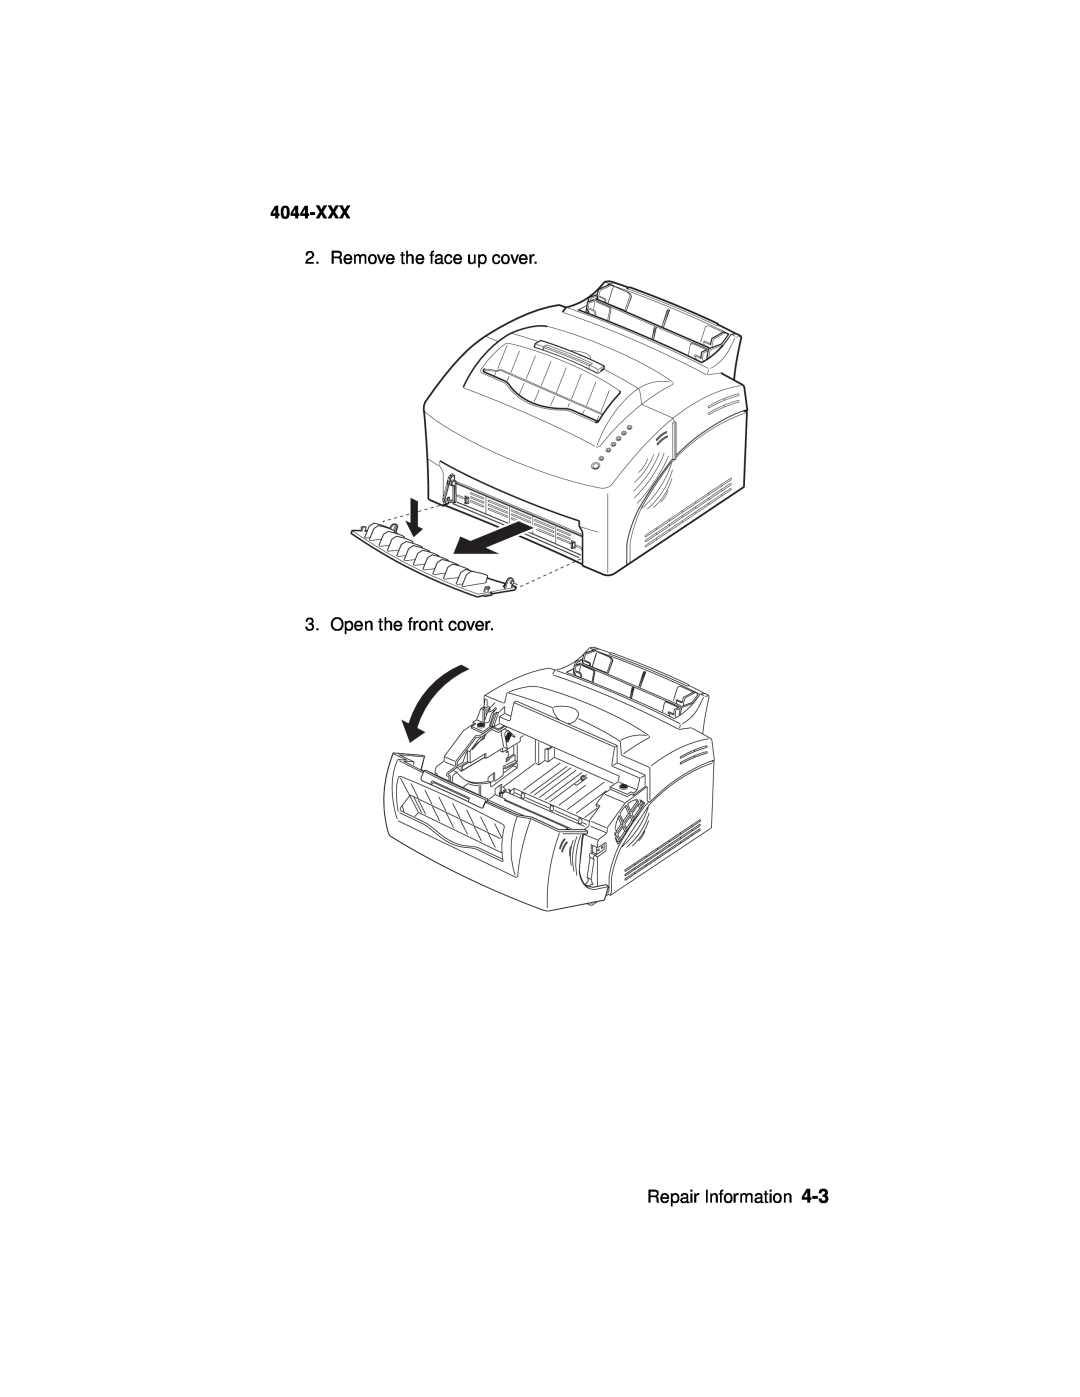 Lexmark E310 manual 4044-XXX, Remove the face up cover, Open the front cover, Repair Information 